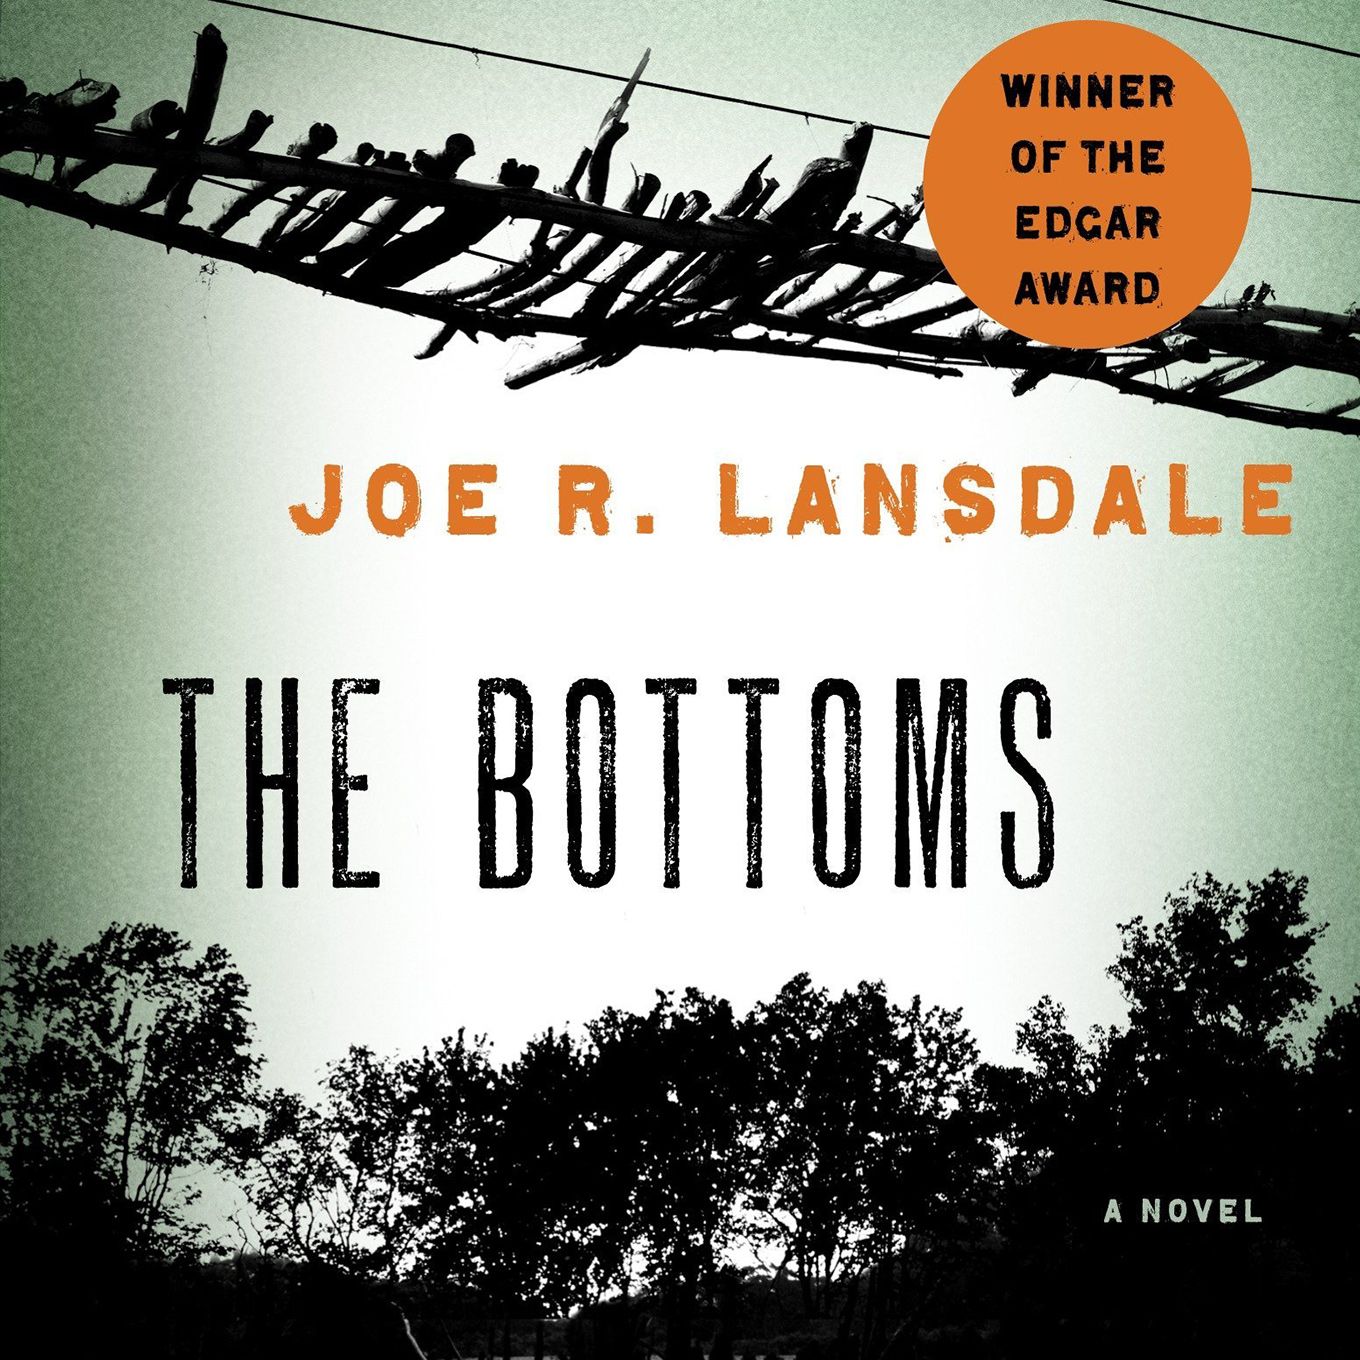 The Bottoms by Joe R. Lansdale